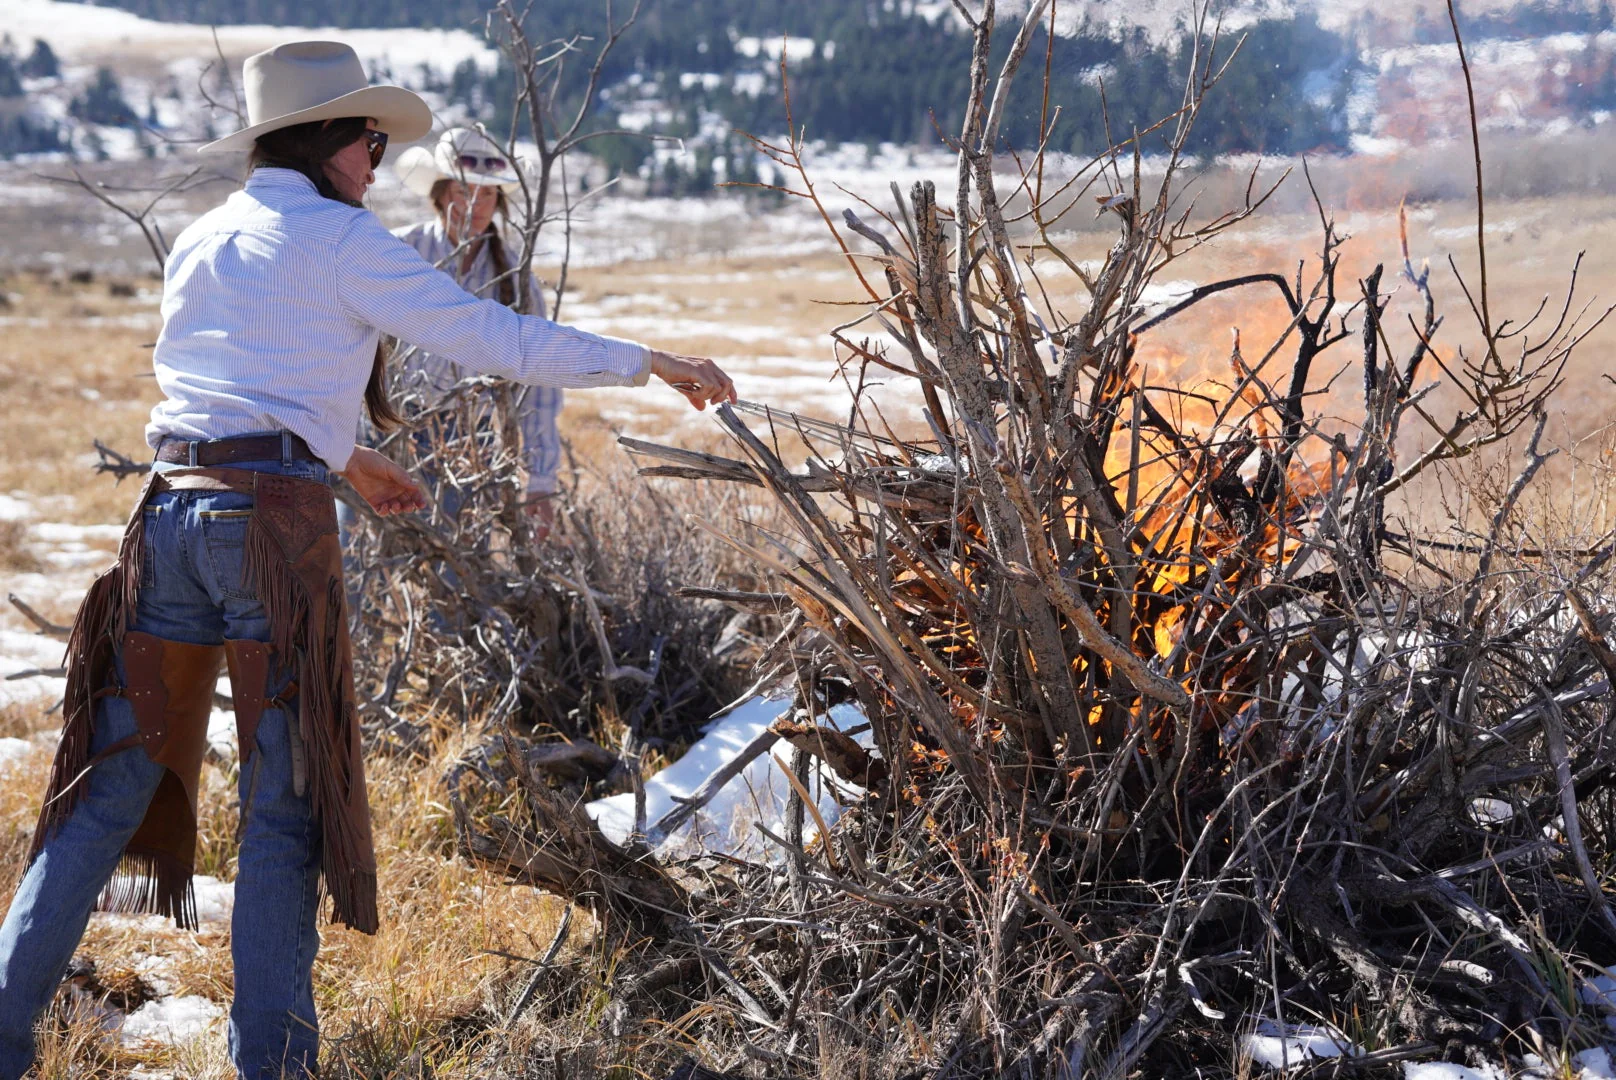 cowgirl starting a fire in a brush pile to cook a meal on